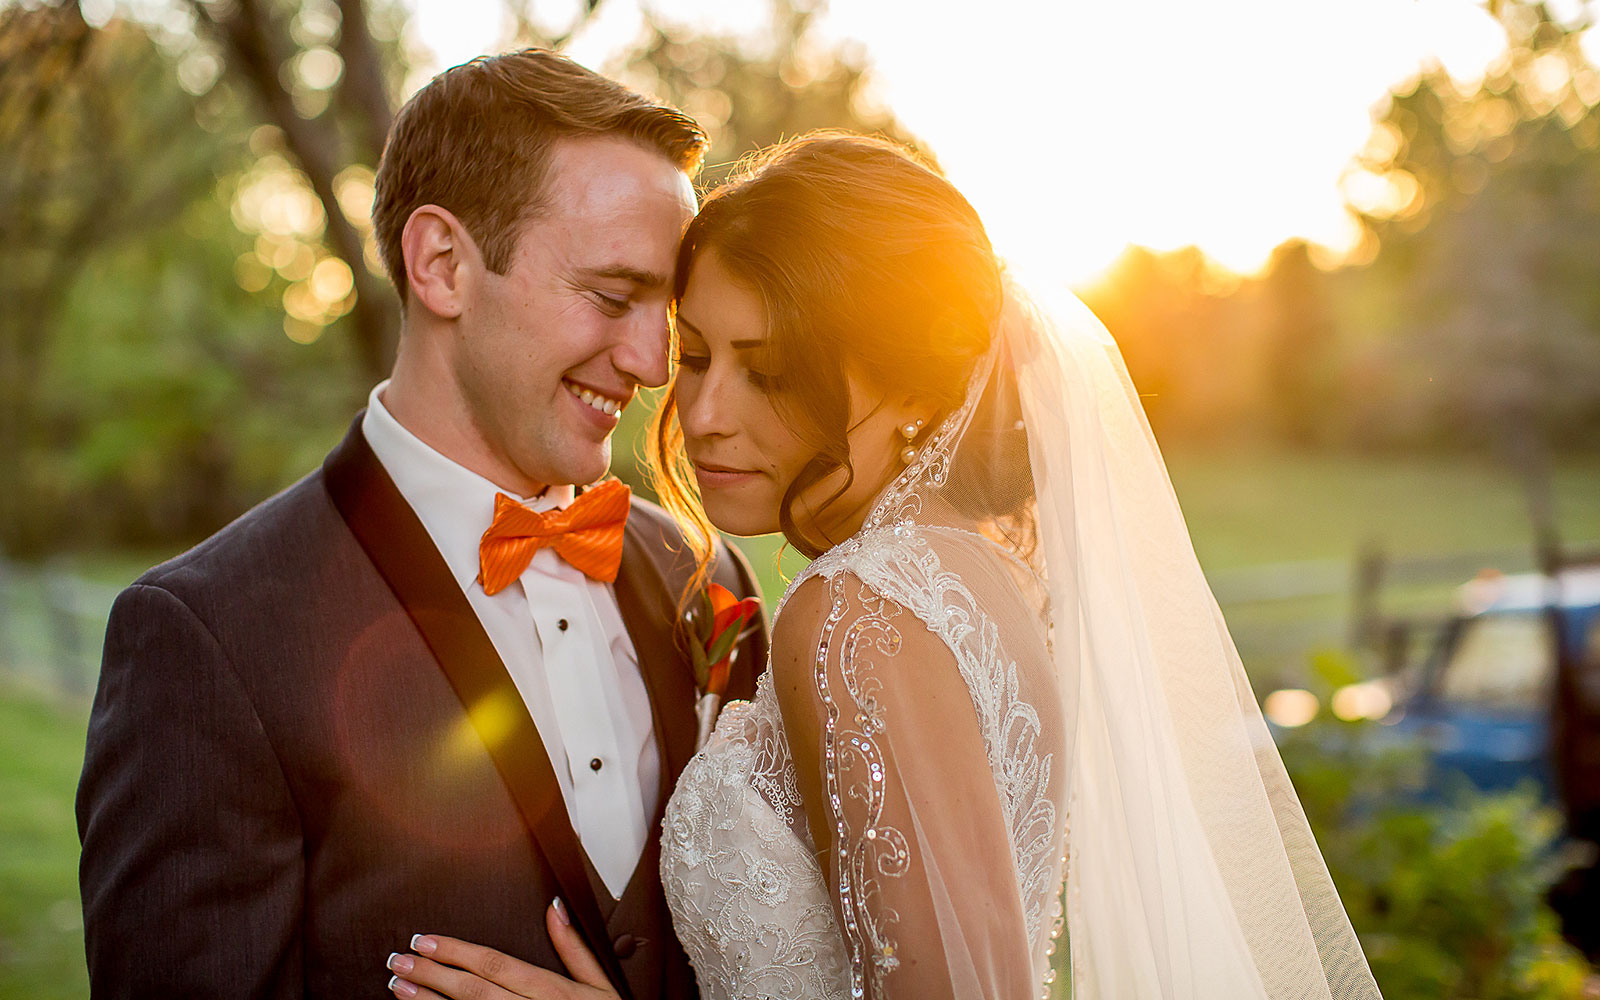 Intimate portrait of new bride and groom by Southern Pennsylvania and Philadelphia wedding photographer Tara Lynn of Silver Orchid Photography